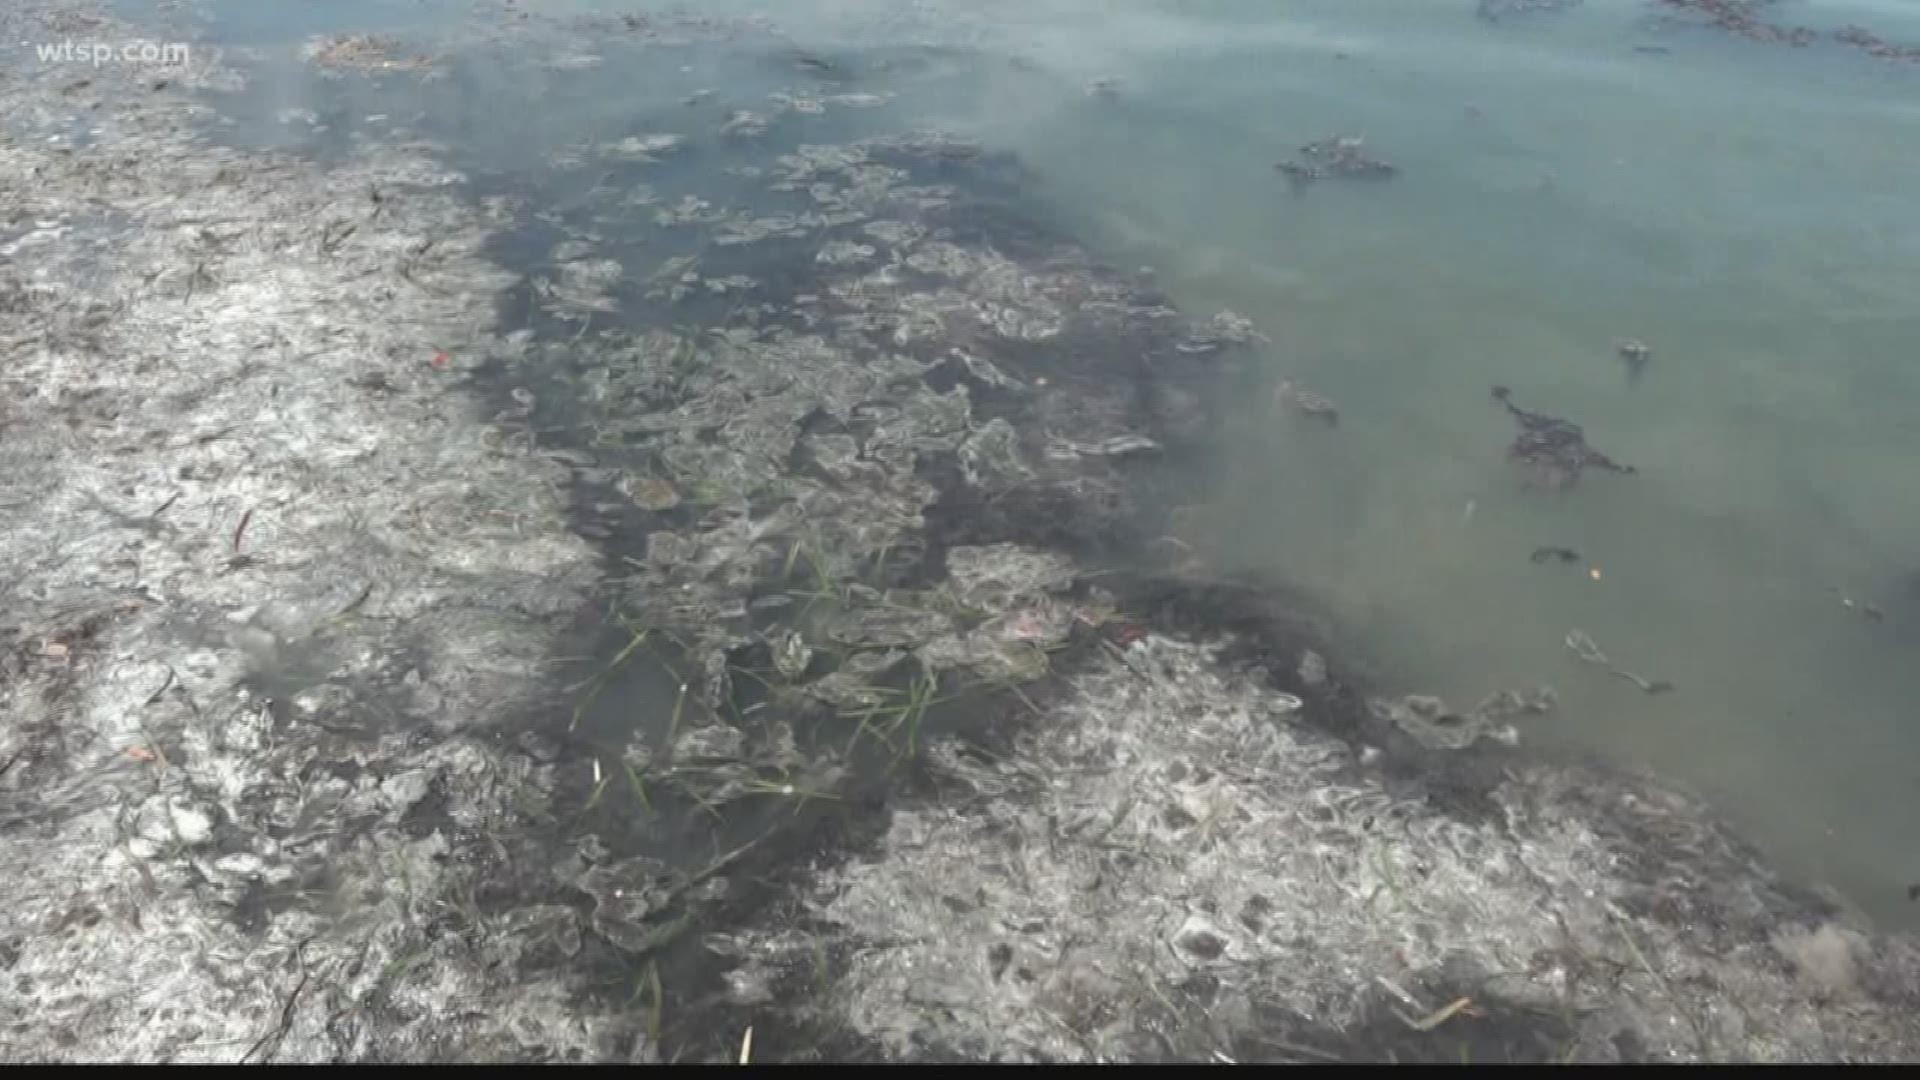 While we saw that blue-green algae clogging up canals all over South Florida last summer, there's a different type popping up in some Sarasota area waterways.